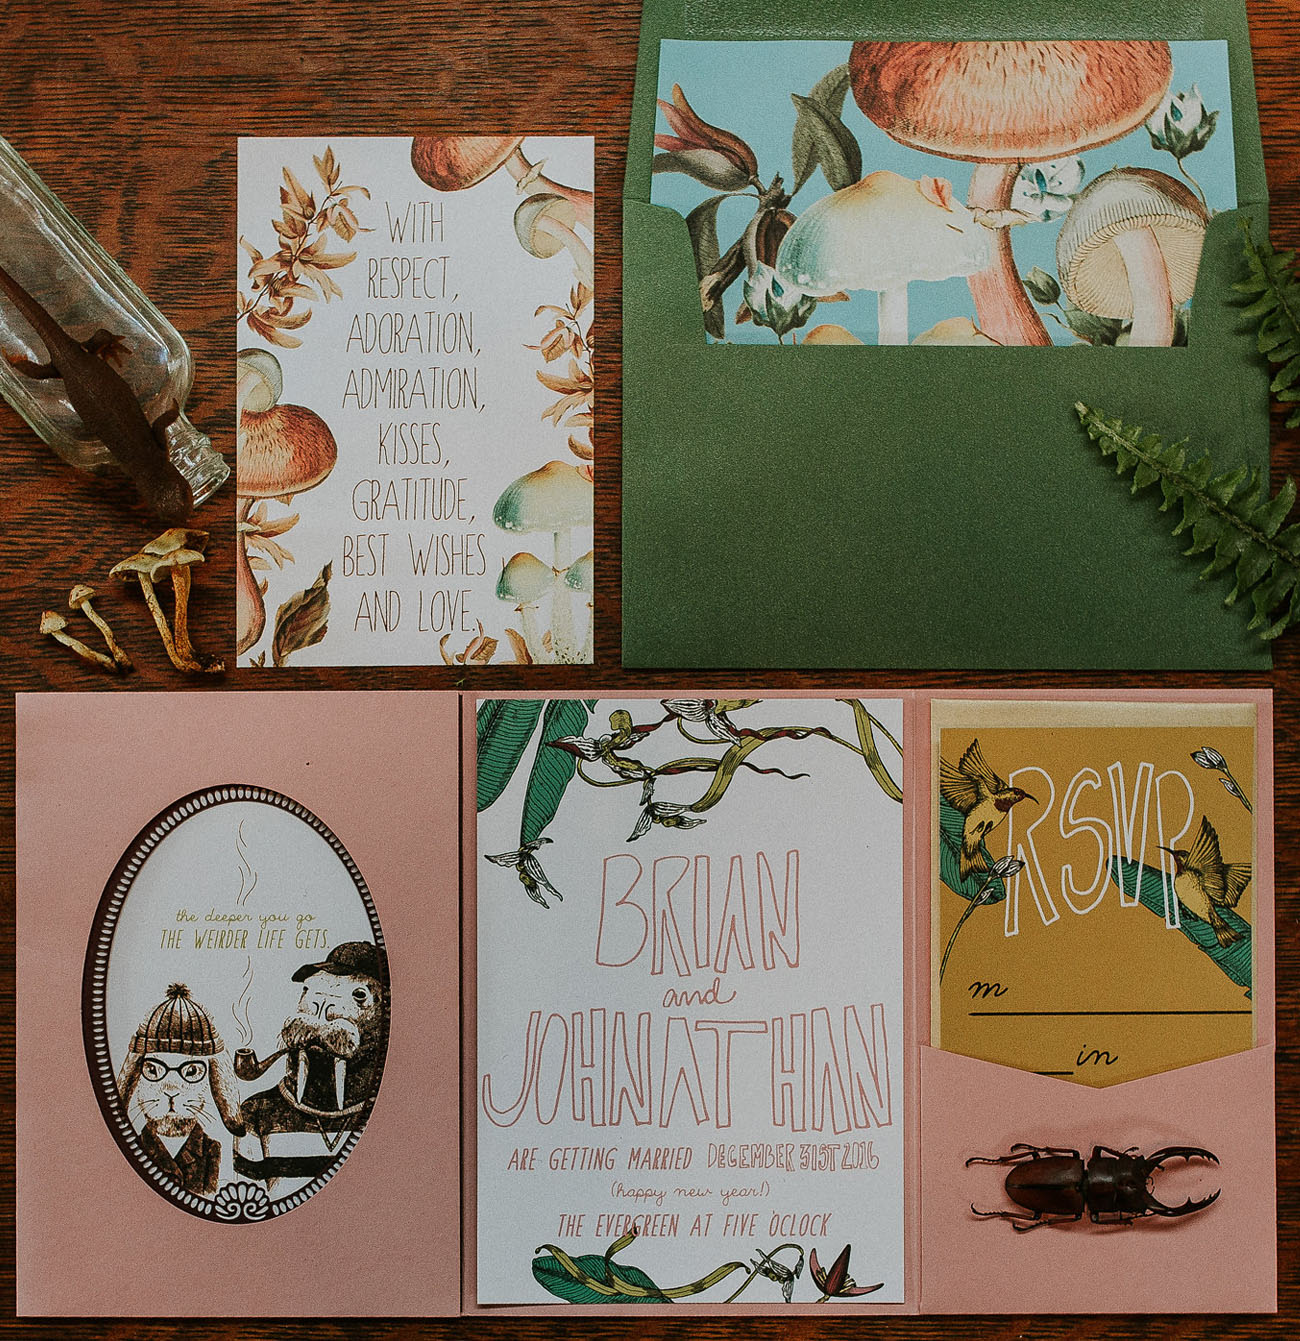 Look at this colorful invitation suite with mushrooms and animals